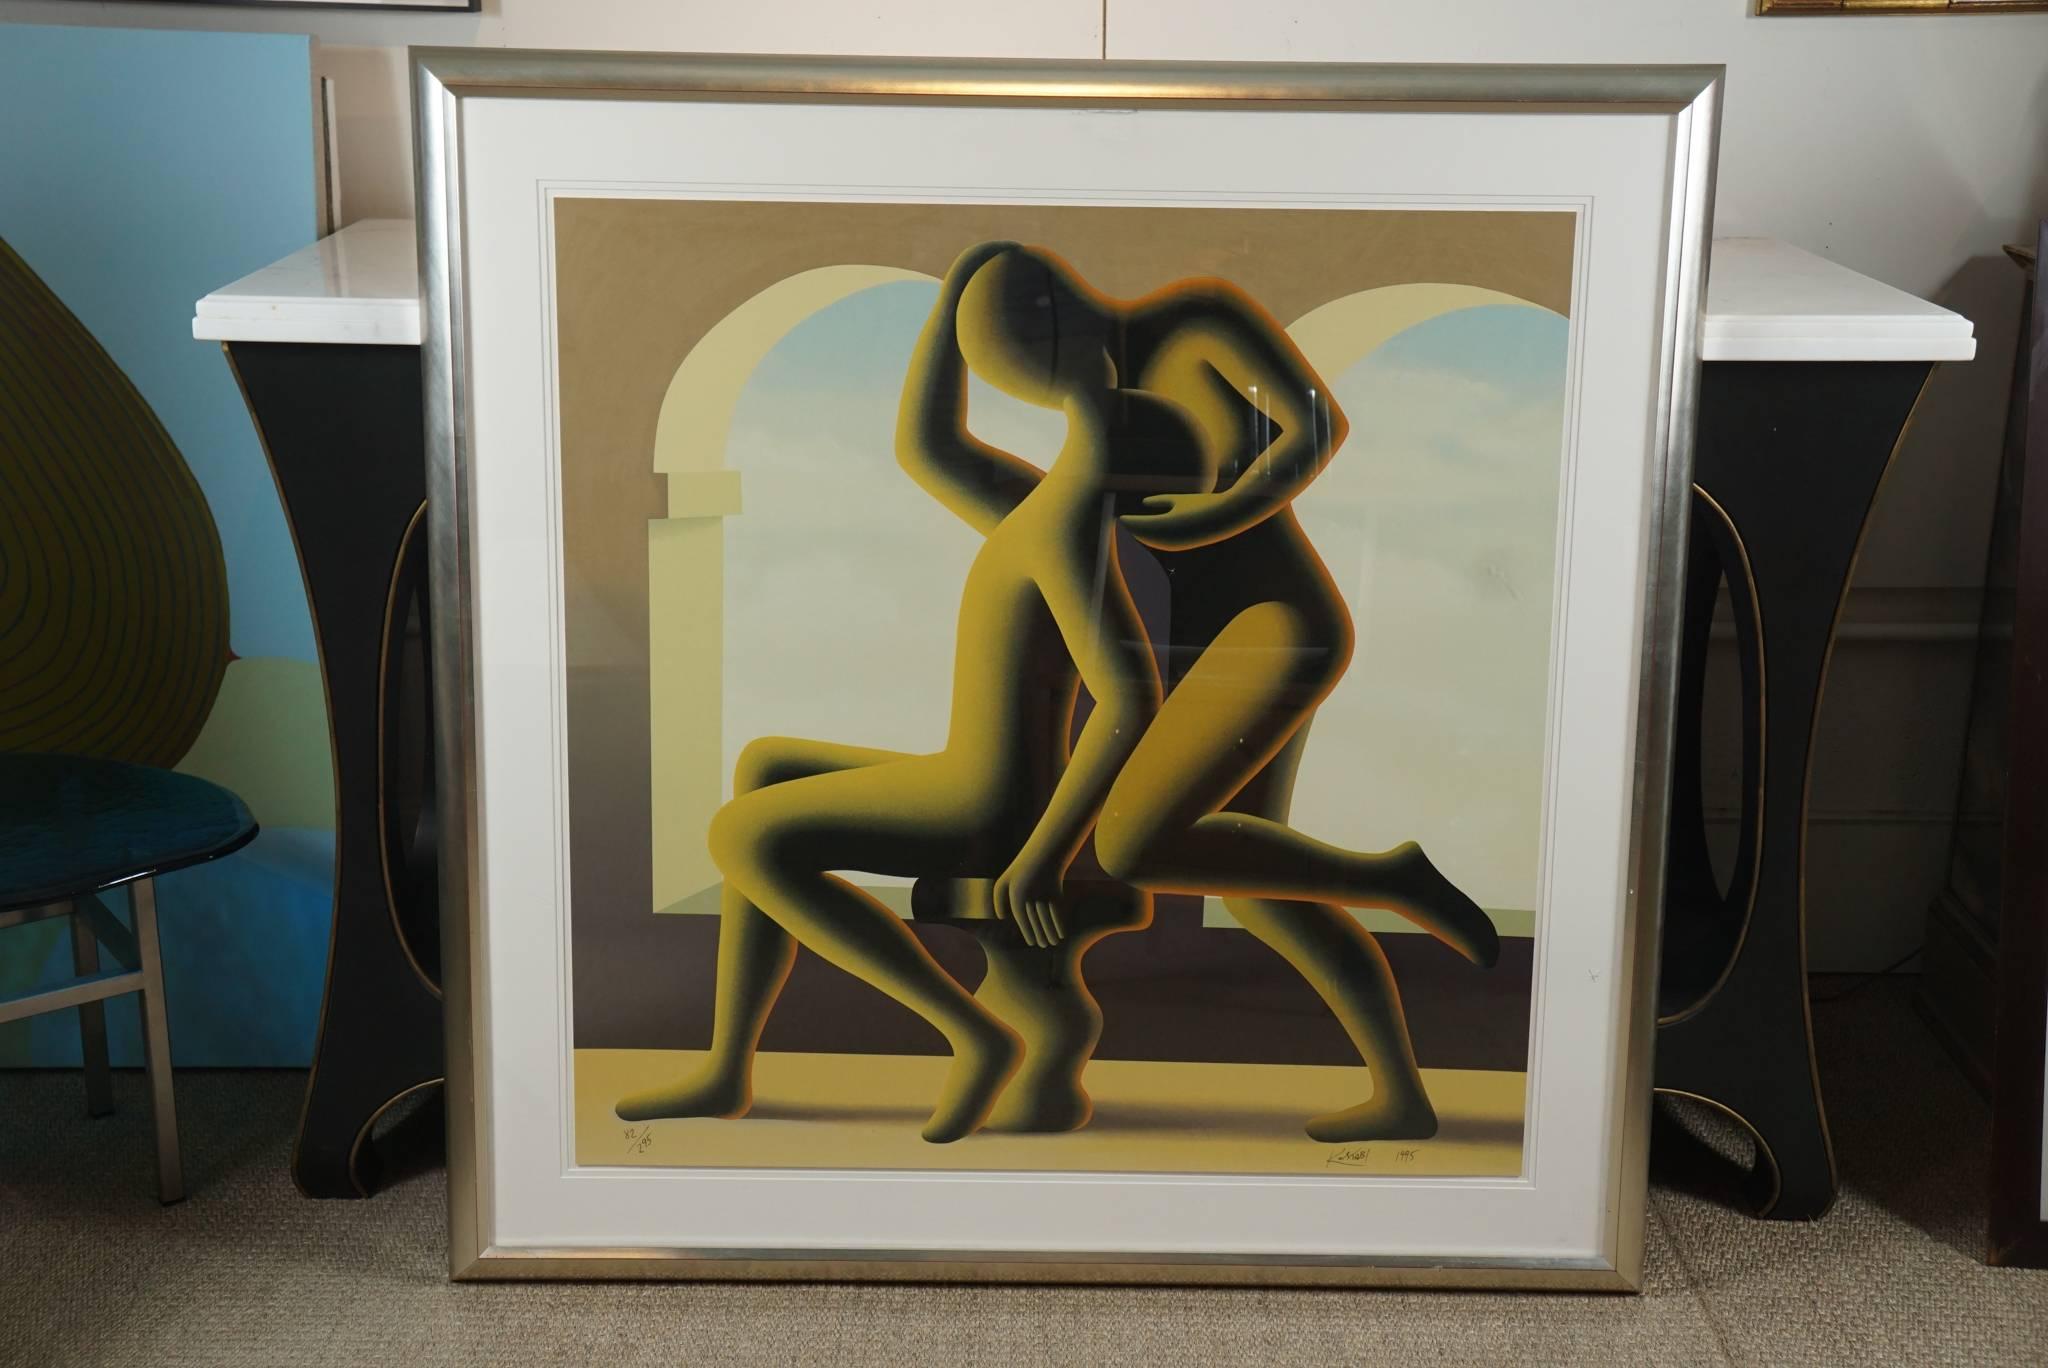 Here is a Mark Kostabi screen print titled Golden Kiss. The large scaled piece has a biomorphic presence with echoes of Roman architecture in the background. This is a signed and numbered limited edition 82/ 285 from 1995. The piece is framed in